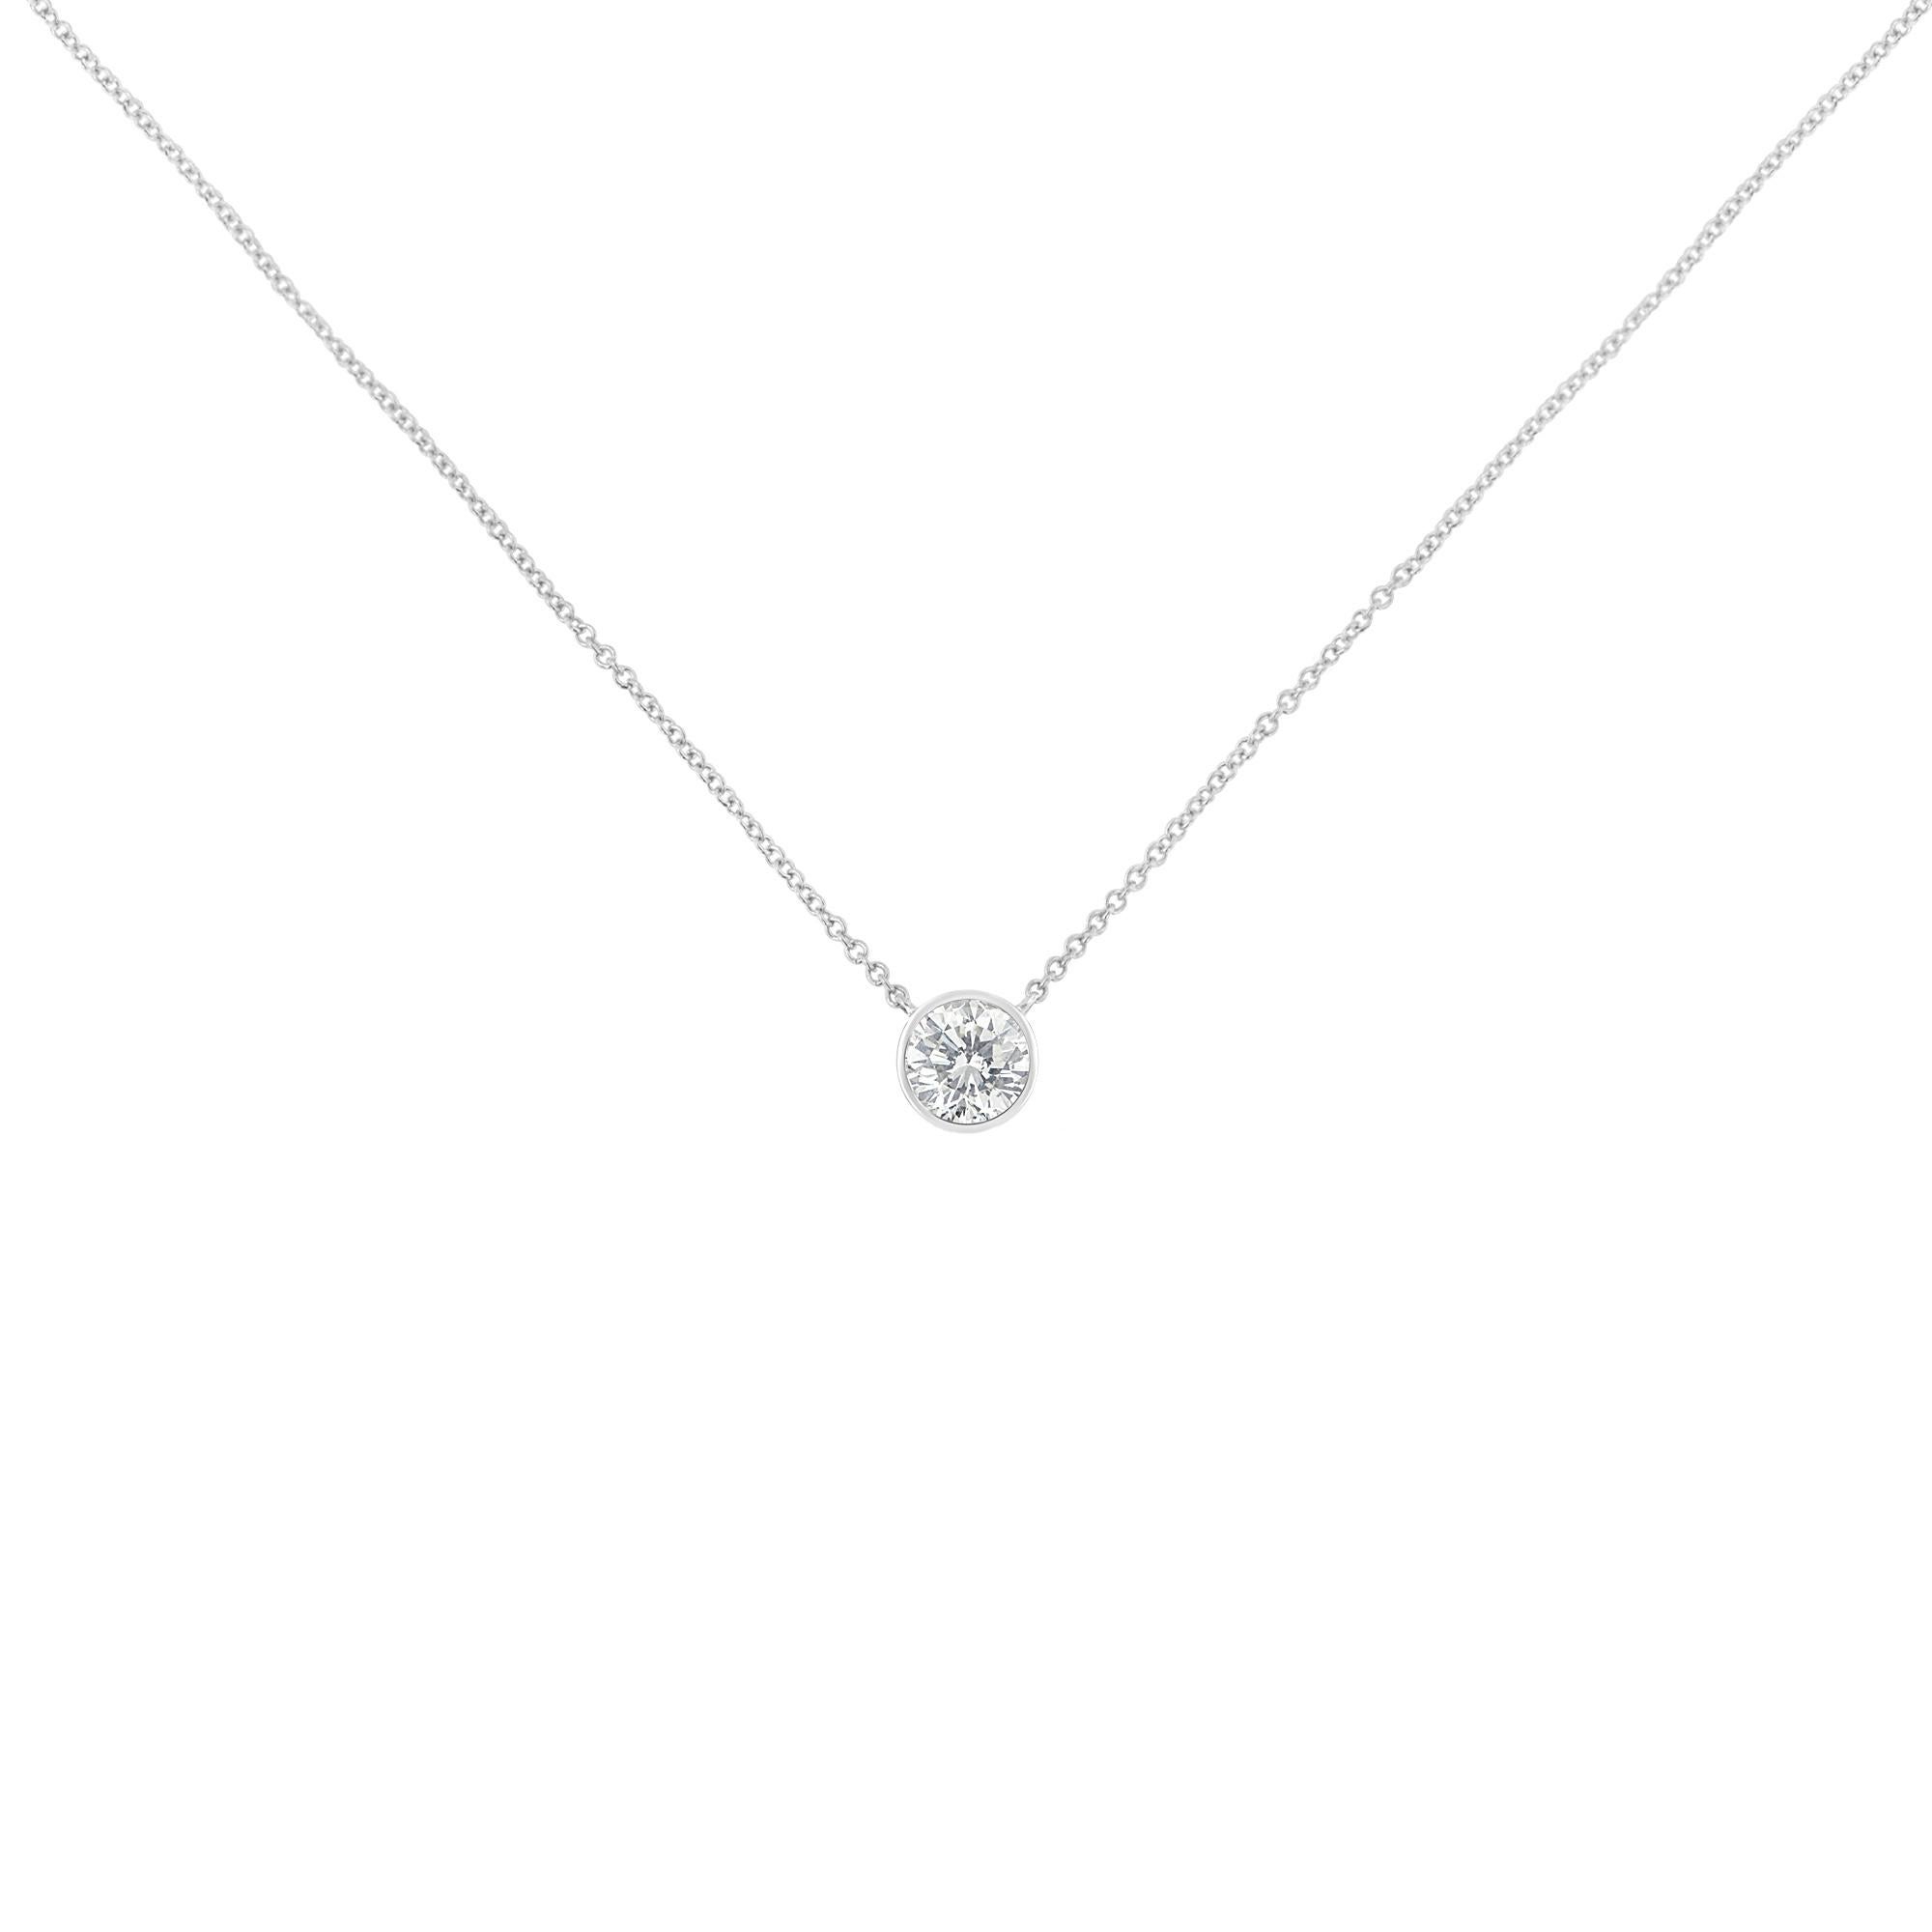 A twinkling 1/5ct round diamond rests in a soft bezel setting. Anchored on each side, a cable chain holds the pendant in place. This 10k white gold necklace is the perfect option for everyday wear. This beautiful necklace includes 18” cable chain